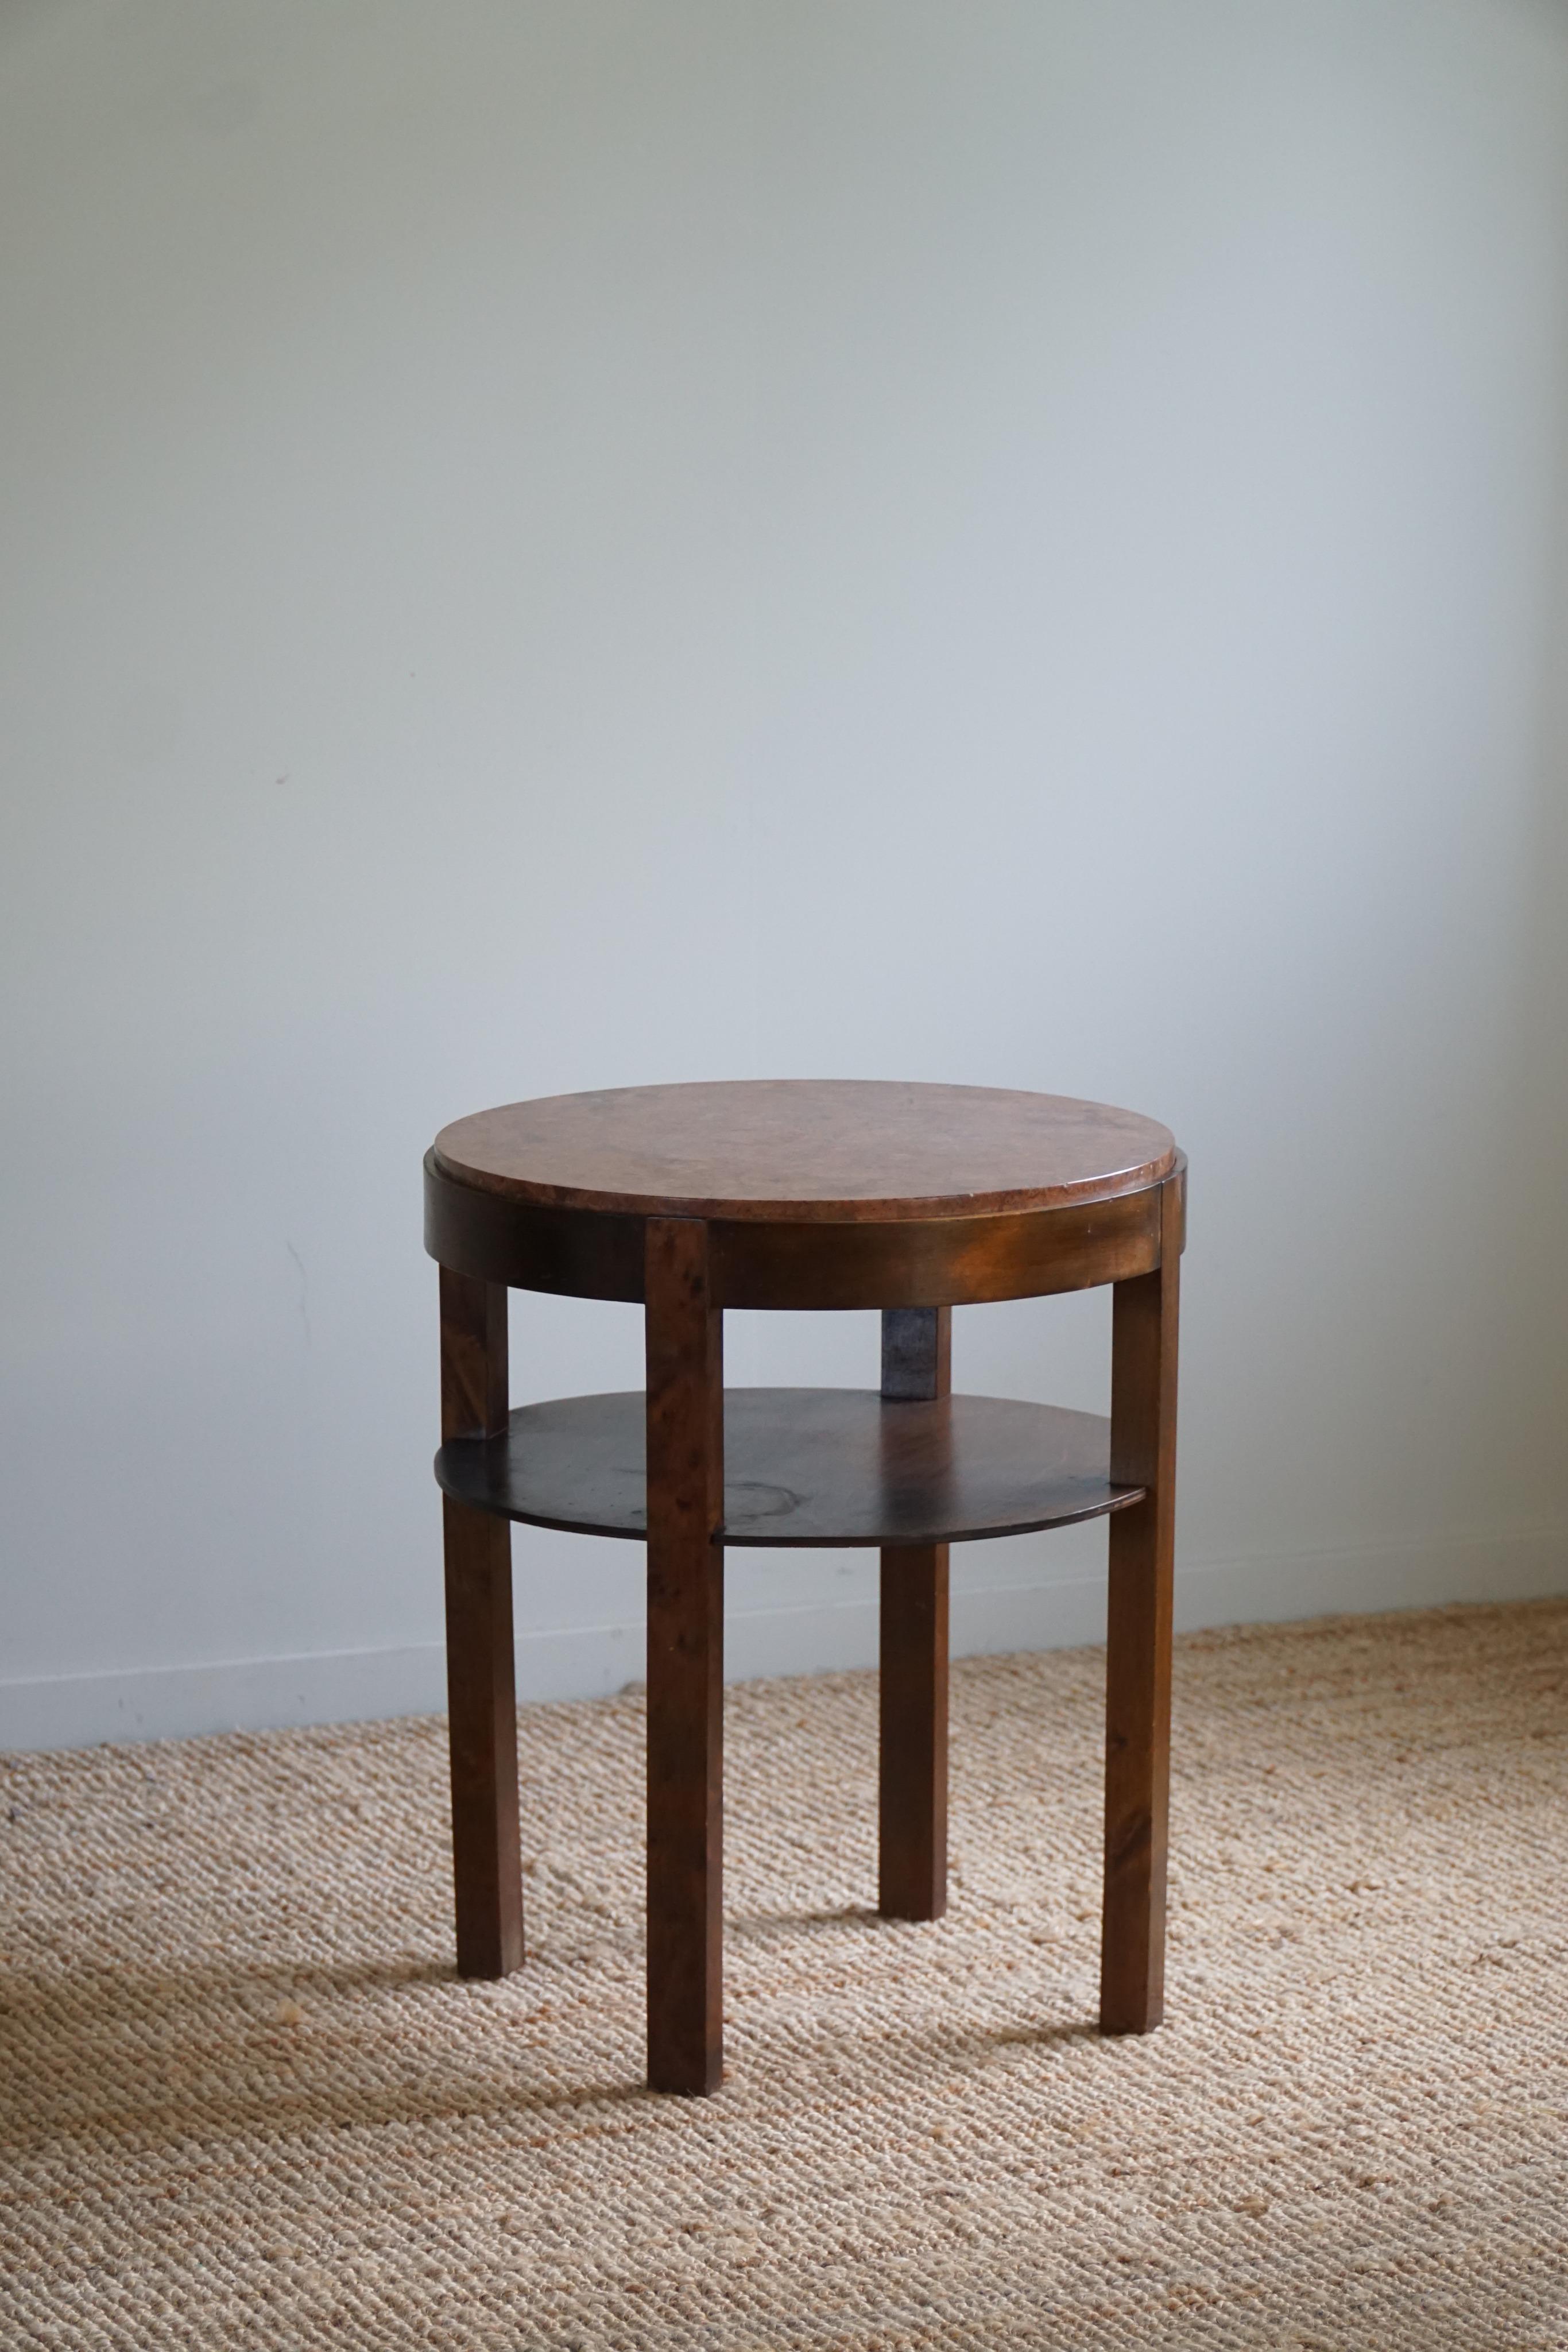 Scandinavian Modern Round Art Deco Side Table in Beech & Marble Top, By a Danish Cabinetmaker, 1940s For Sale